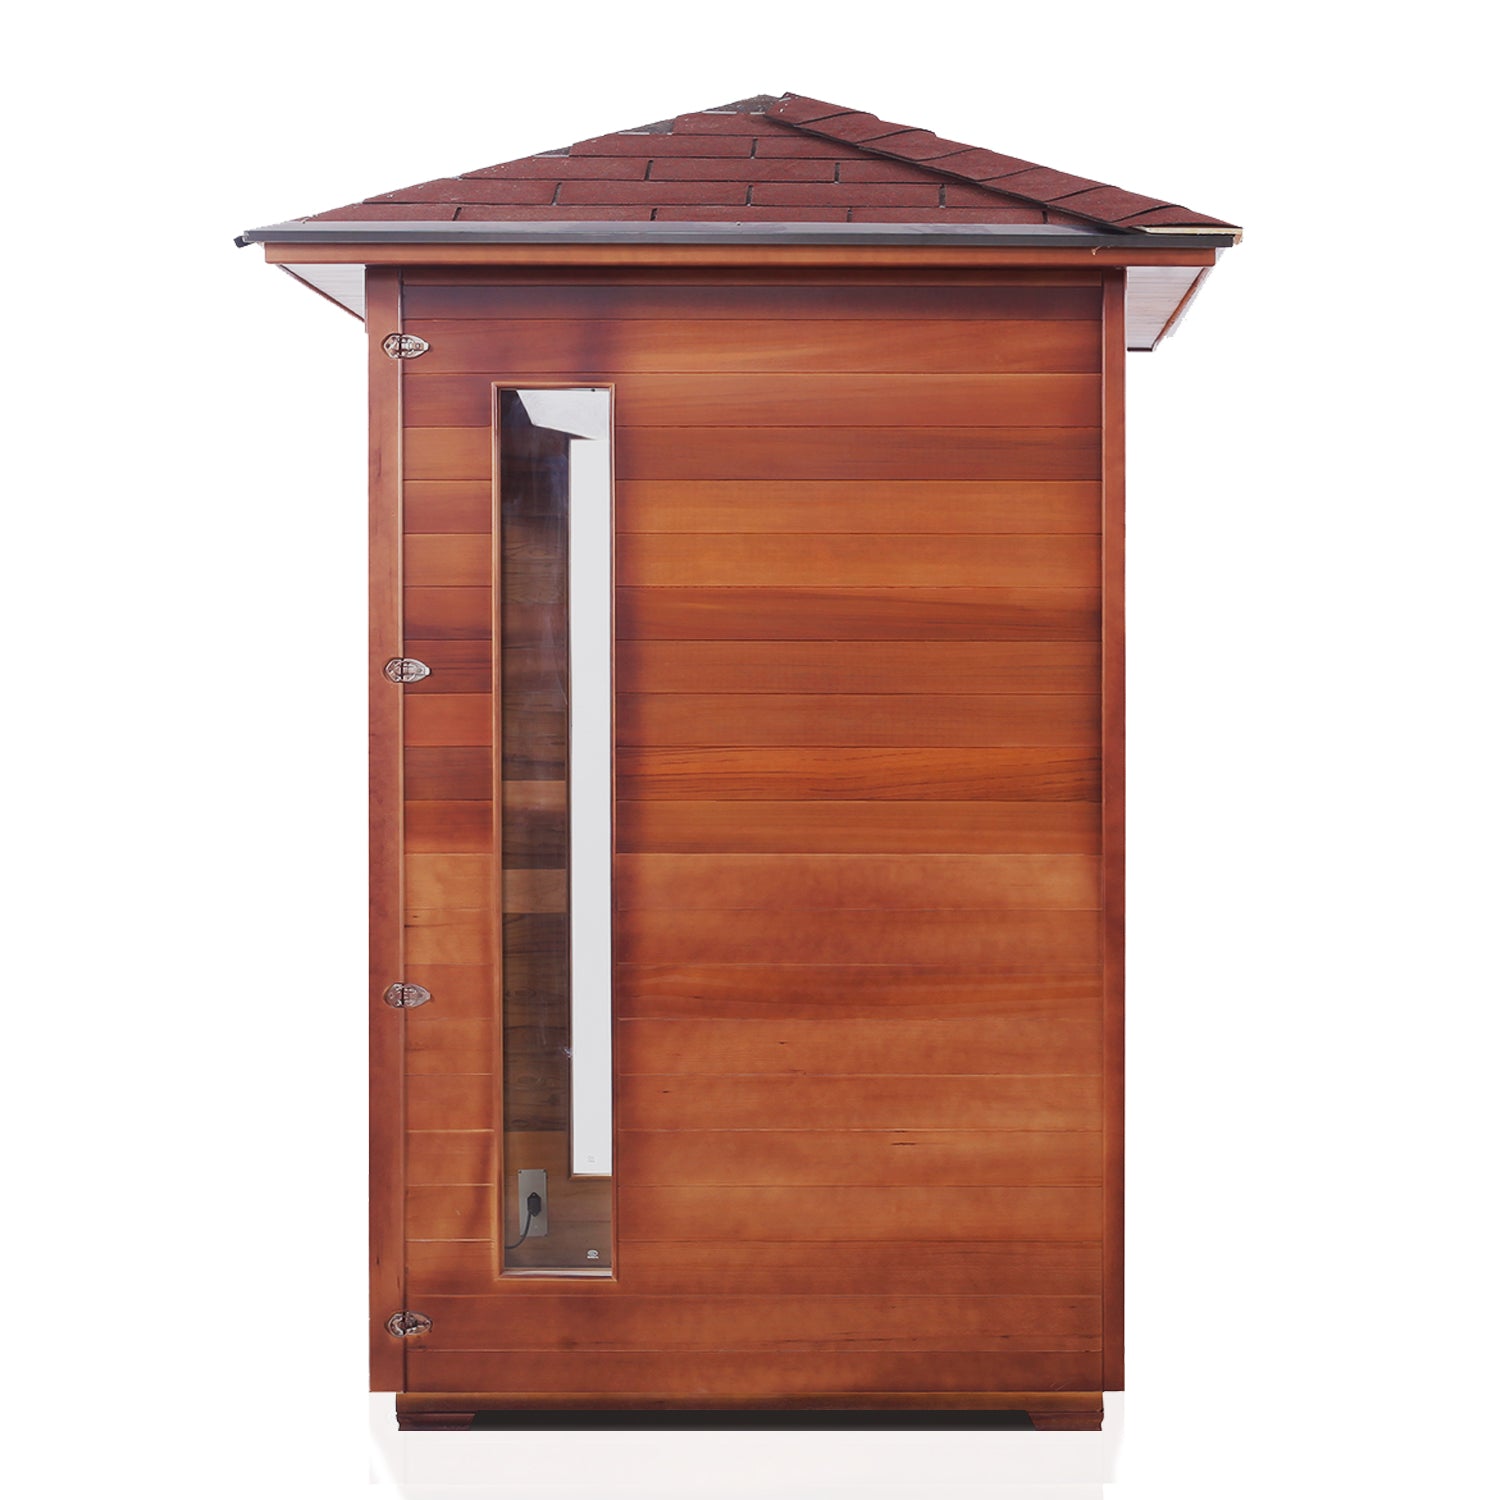 Enlighten Sauna Rustic 3 Person Peak Roof right side view with white background